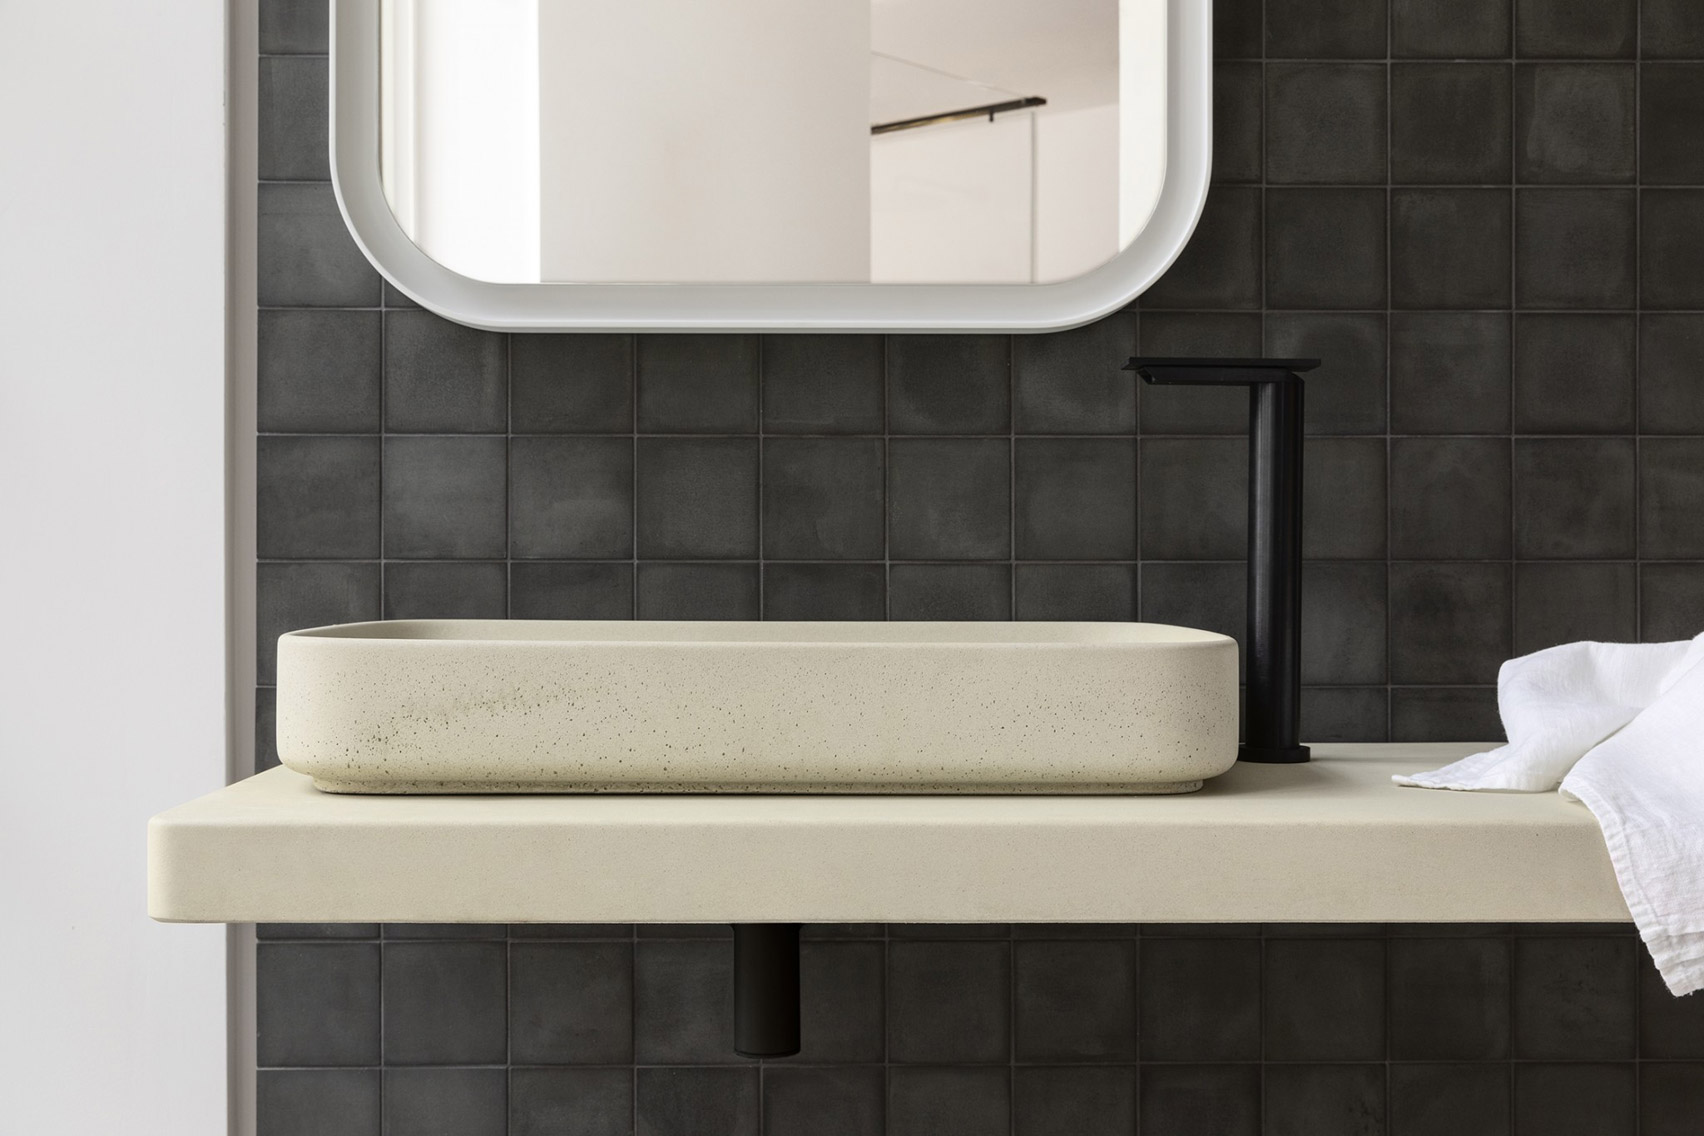 Petra concrete bathroom furniture by Marco Merendi and Diego Vencato with Gypsum